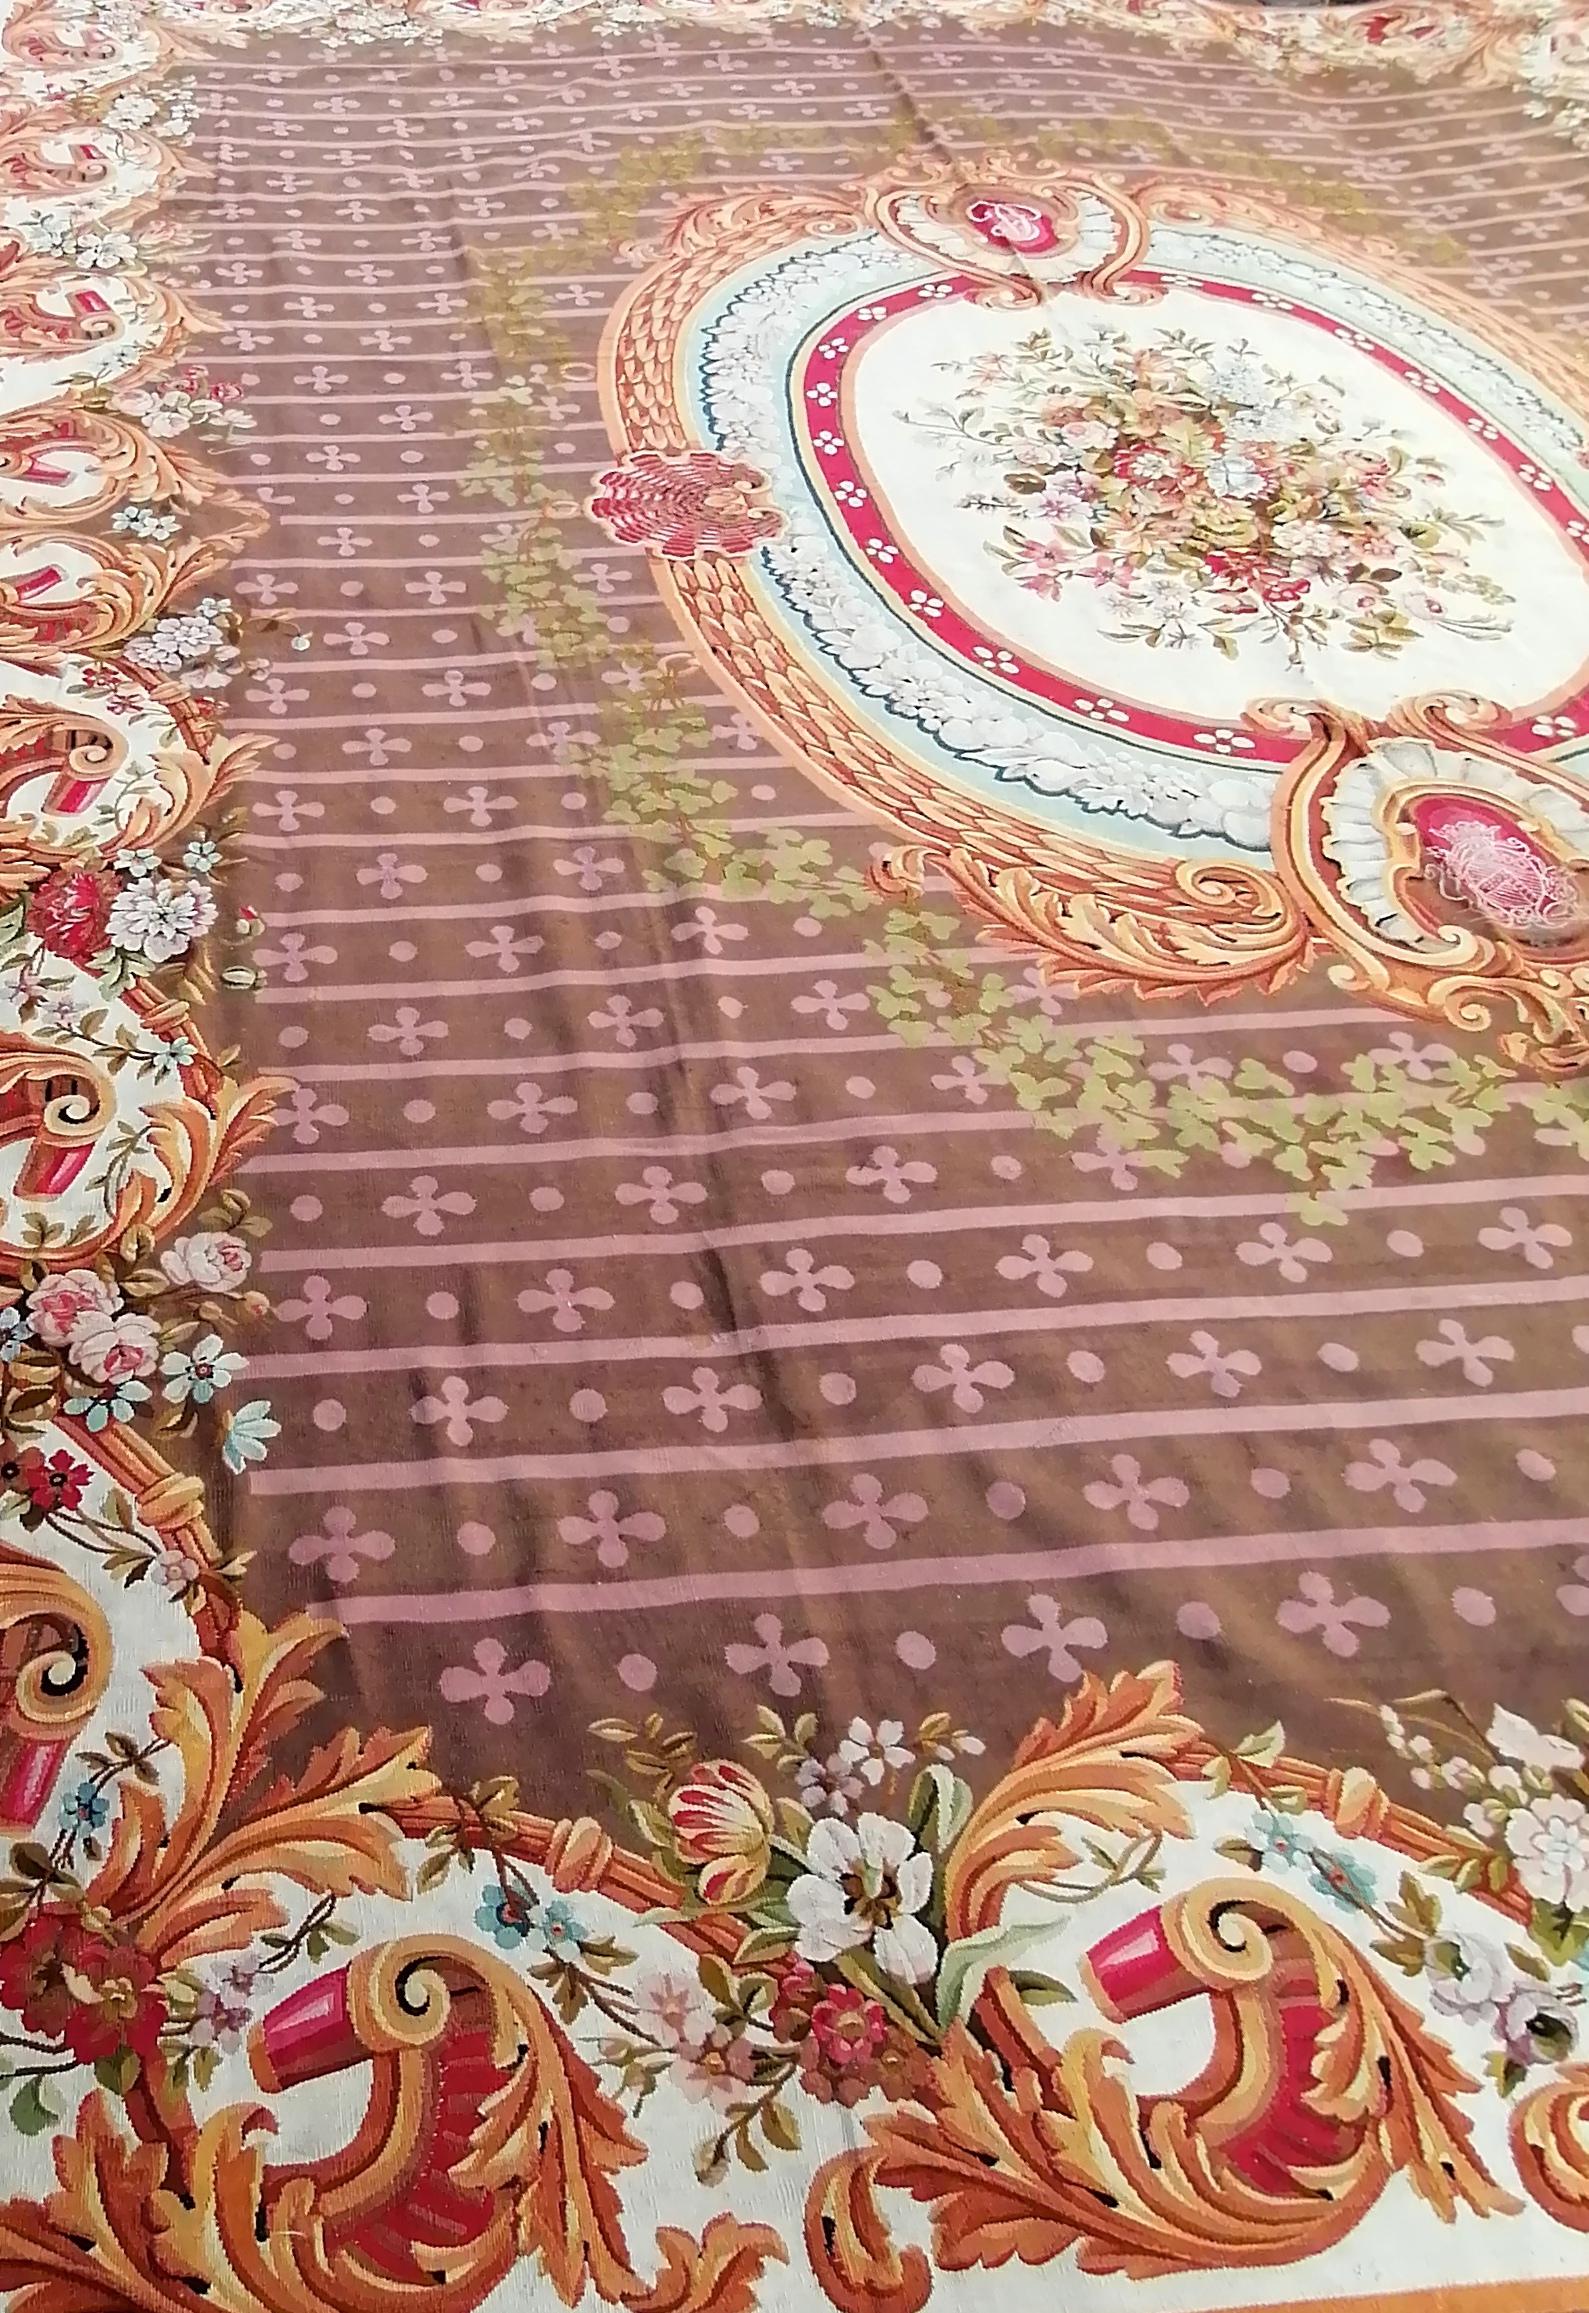 1068 - Beautiful and large 19th century French Aubusson rug with a beautiful decorative design in French Louis XIV style, and natural colors, completely hand-woven with wool on a cotton base.